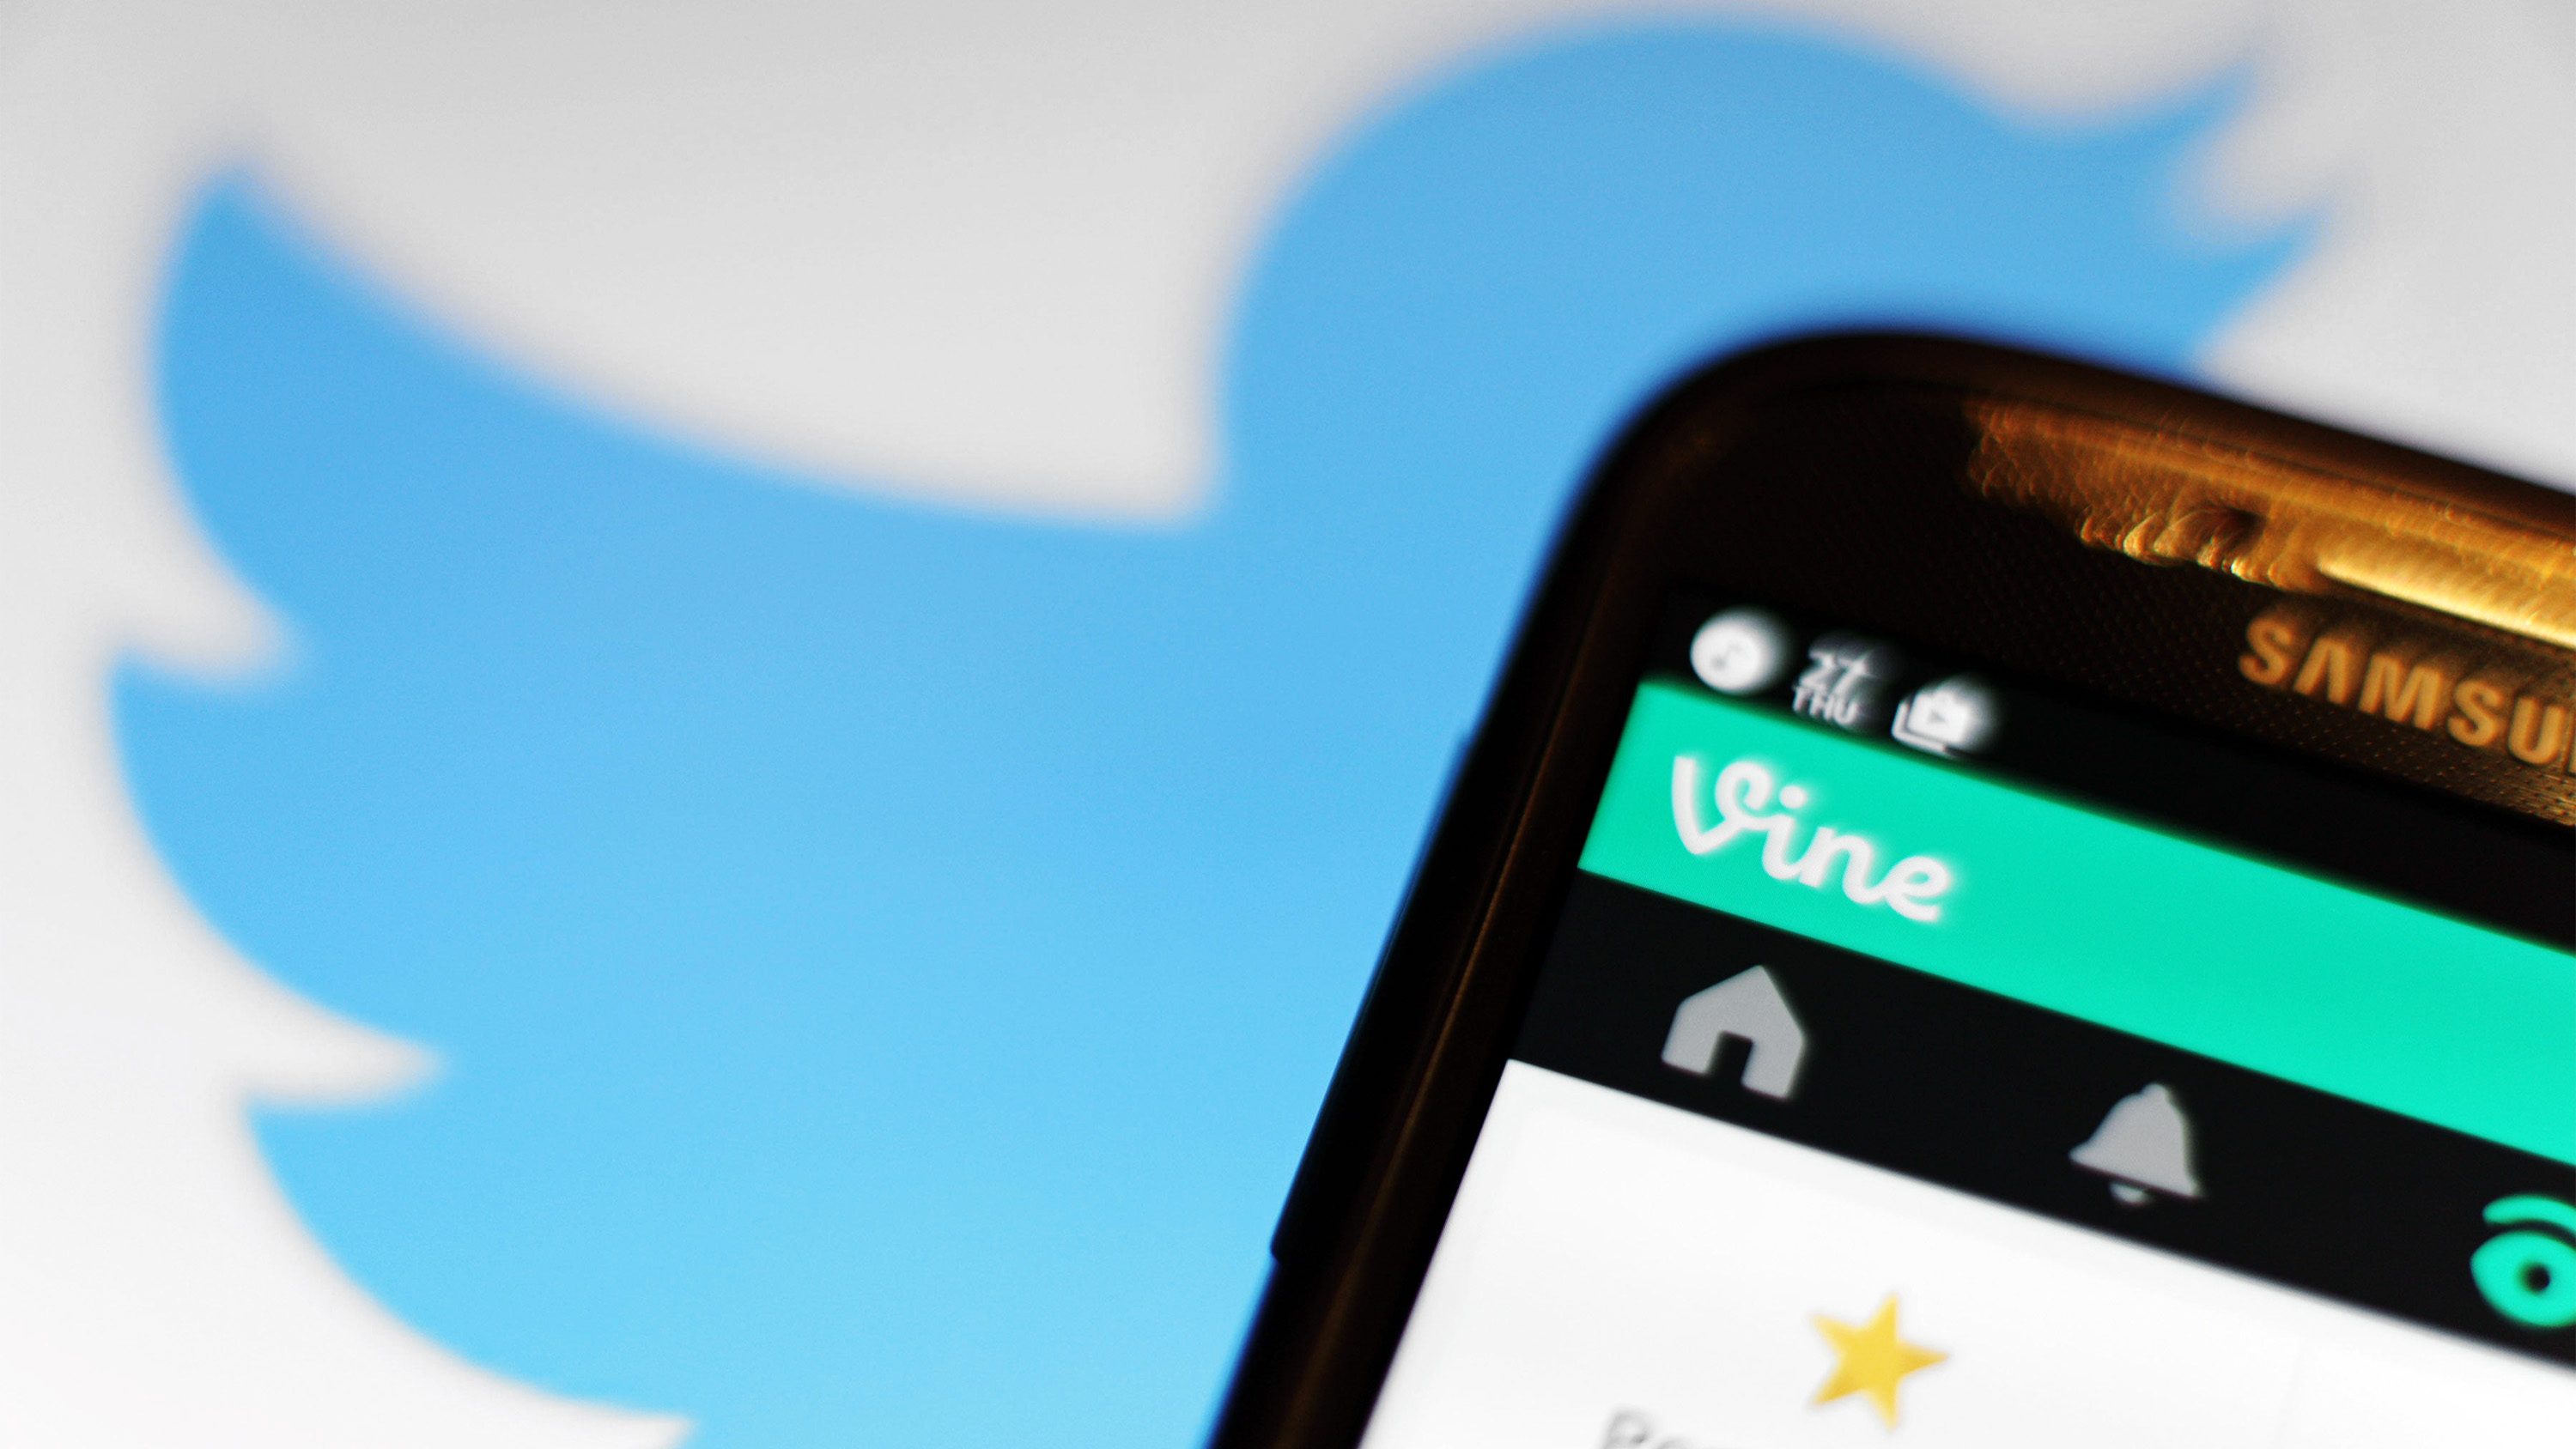 twitter logo behing a phone with Vine app